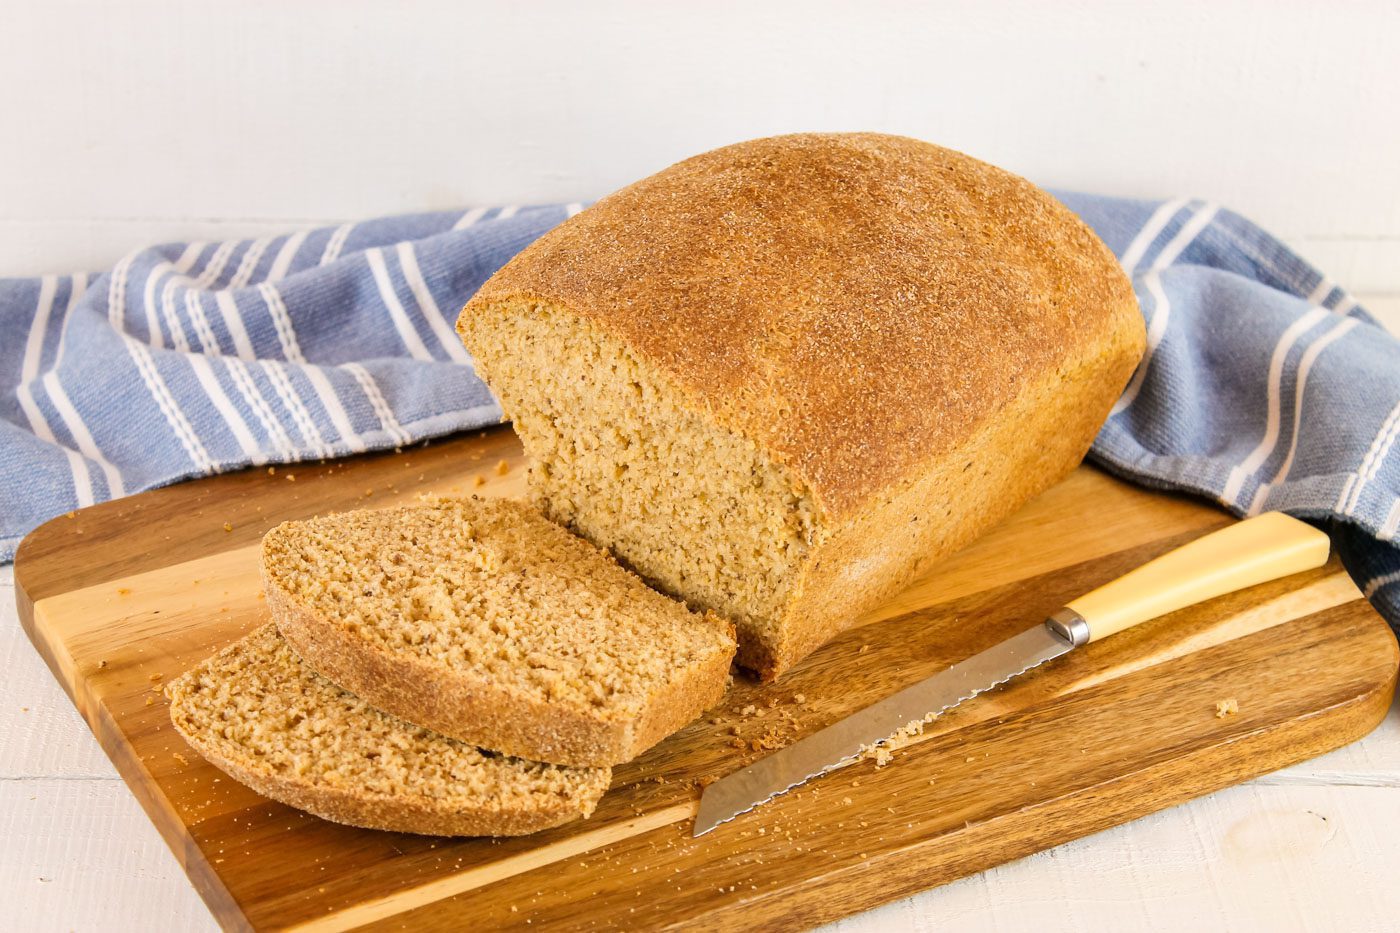 loaf of bread with two slices sits next to a bread knife and blue kitchen towel